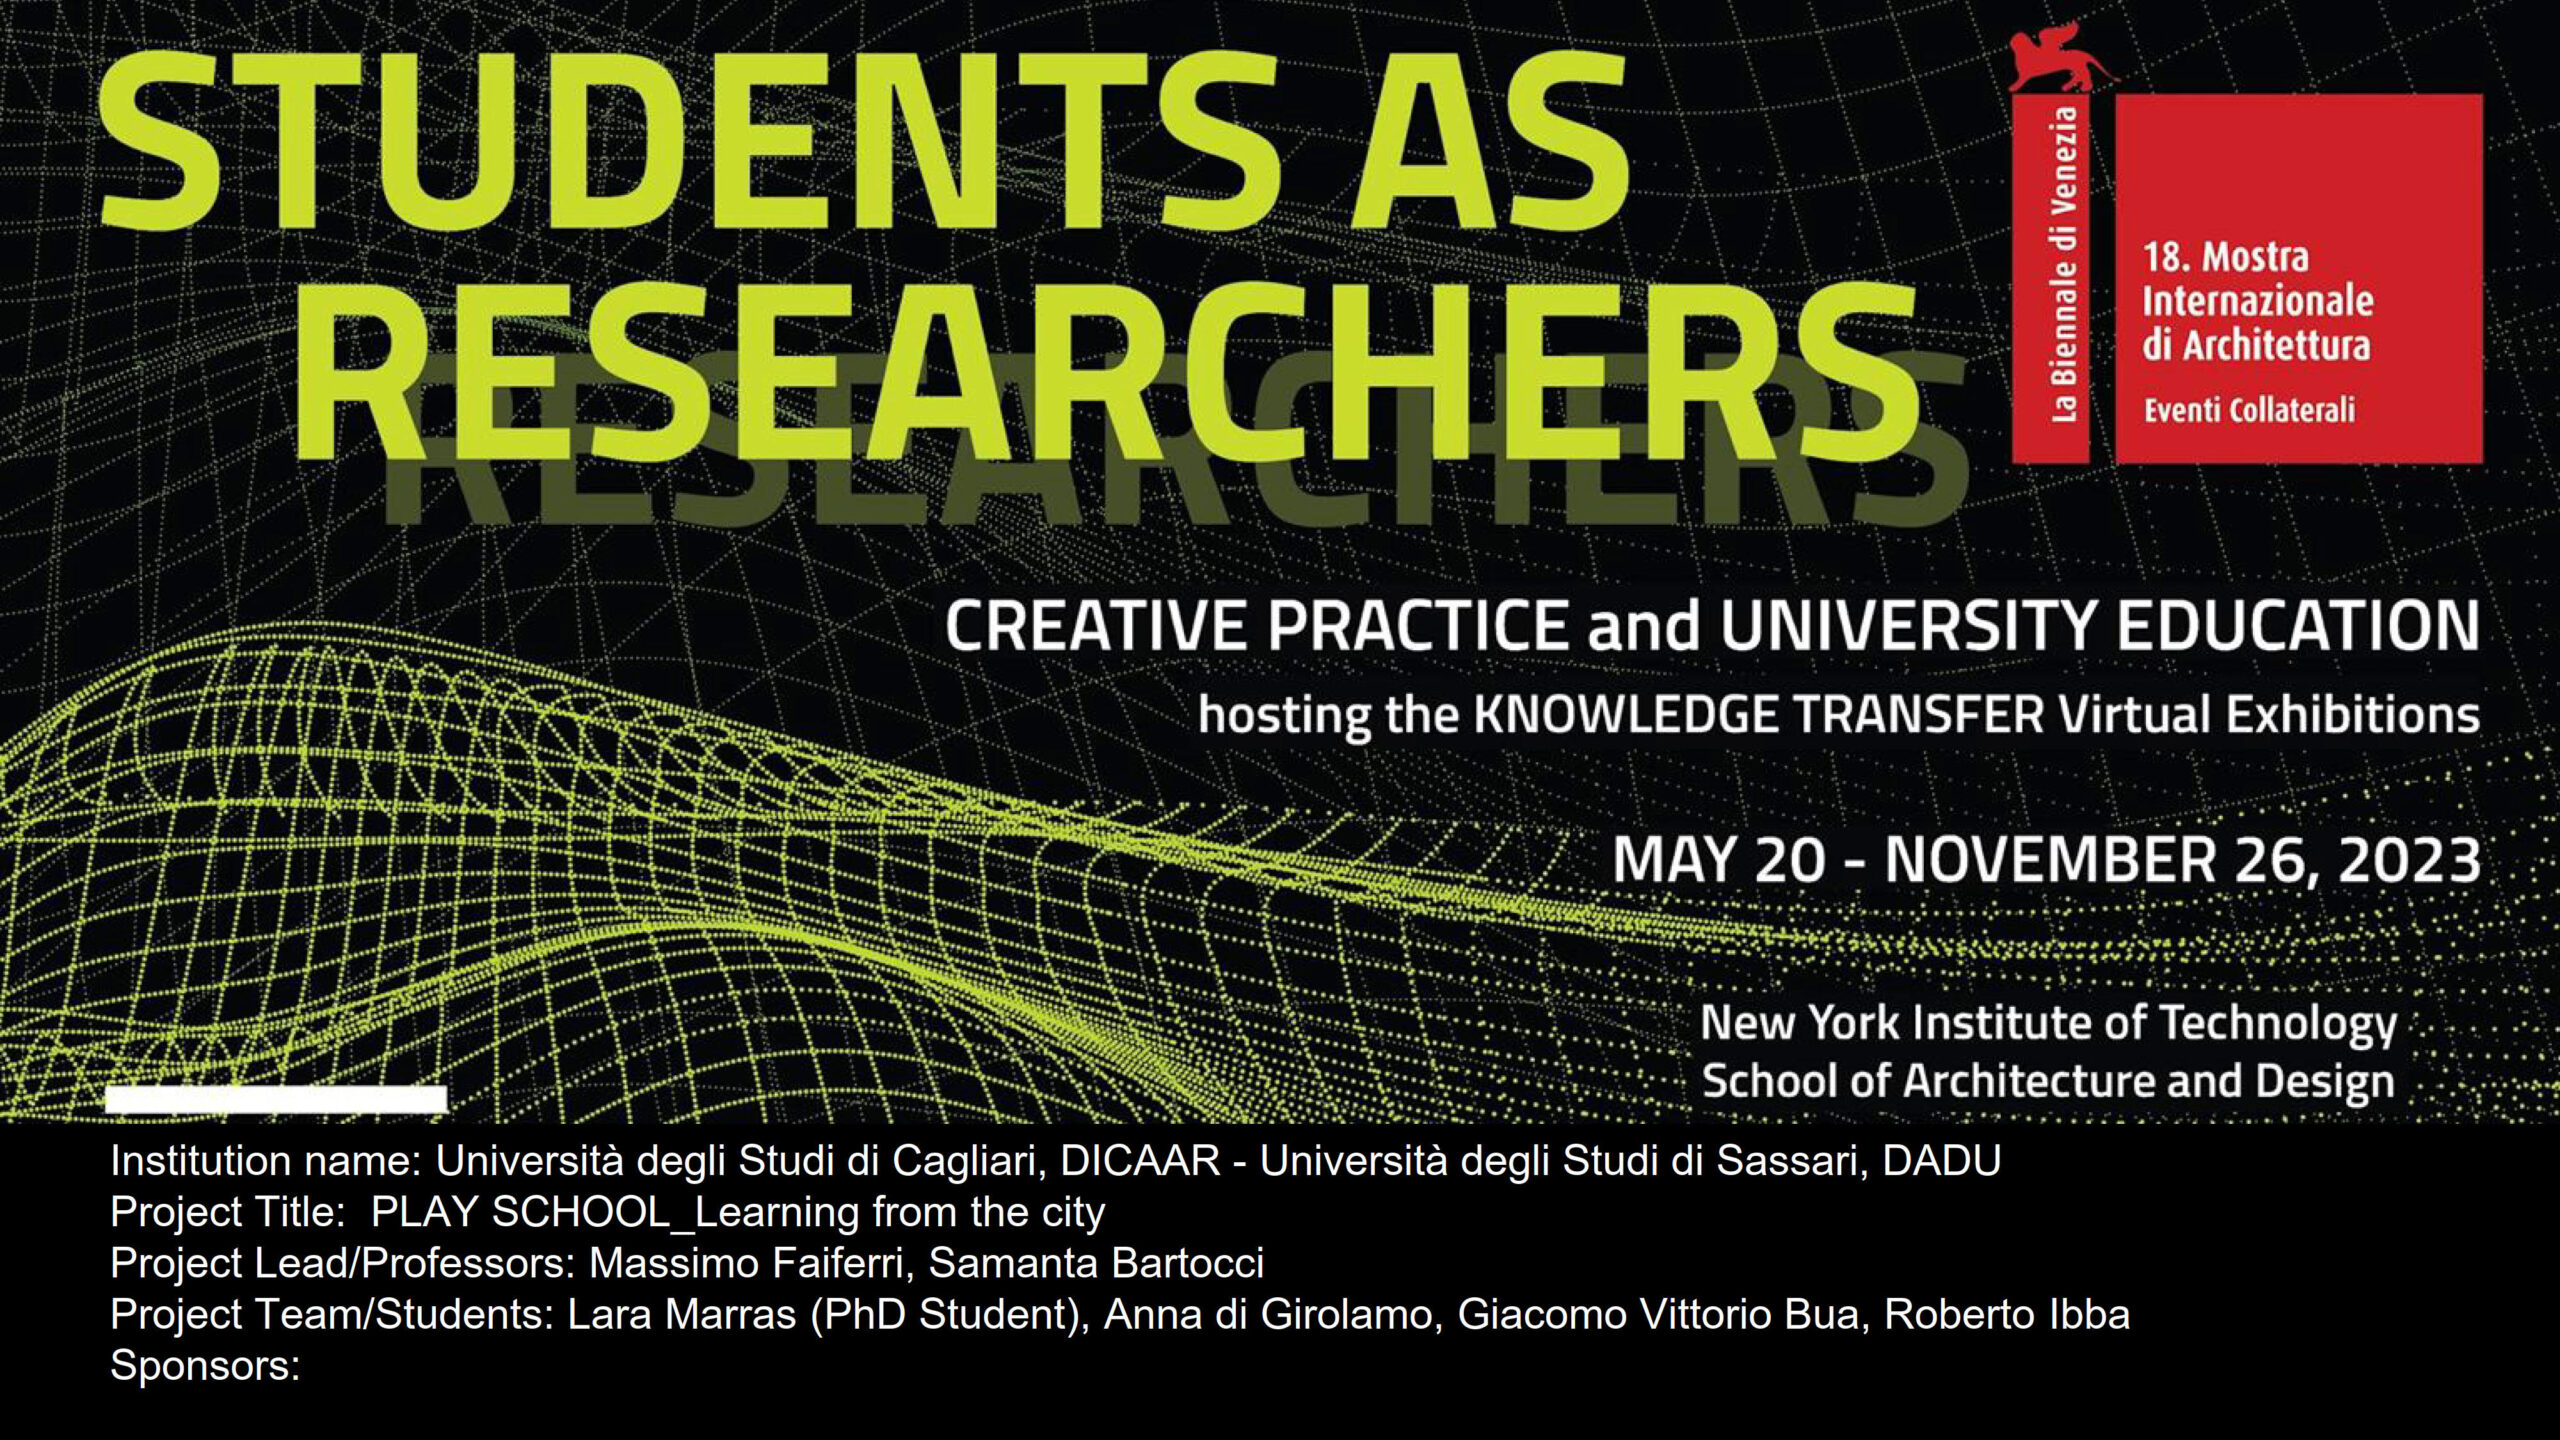 Students as Researchers: Creative Practice and University Education